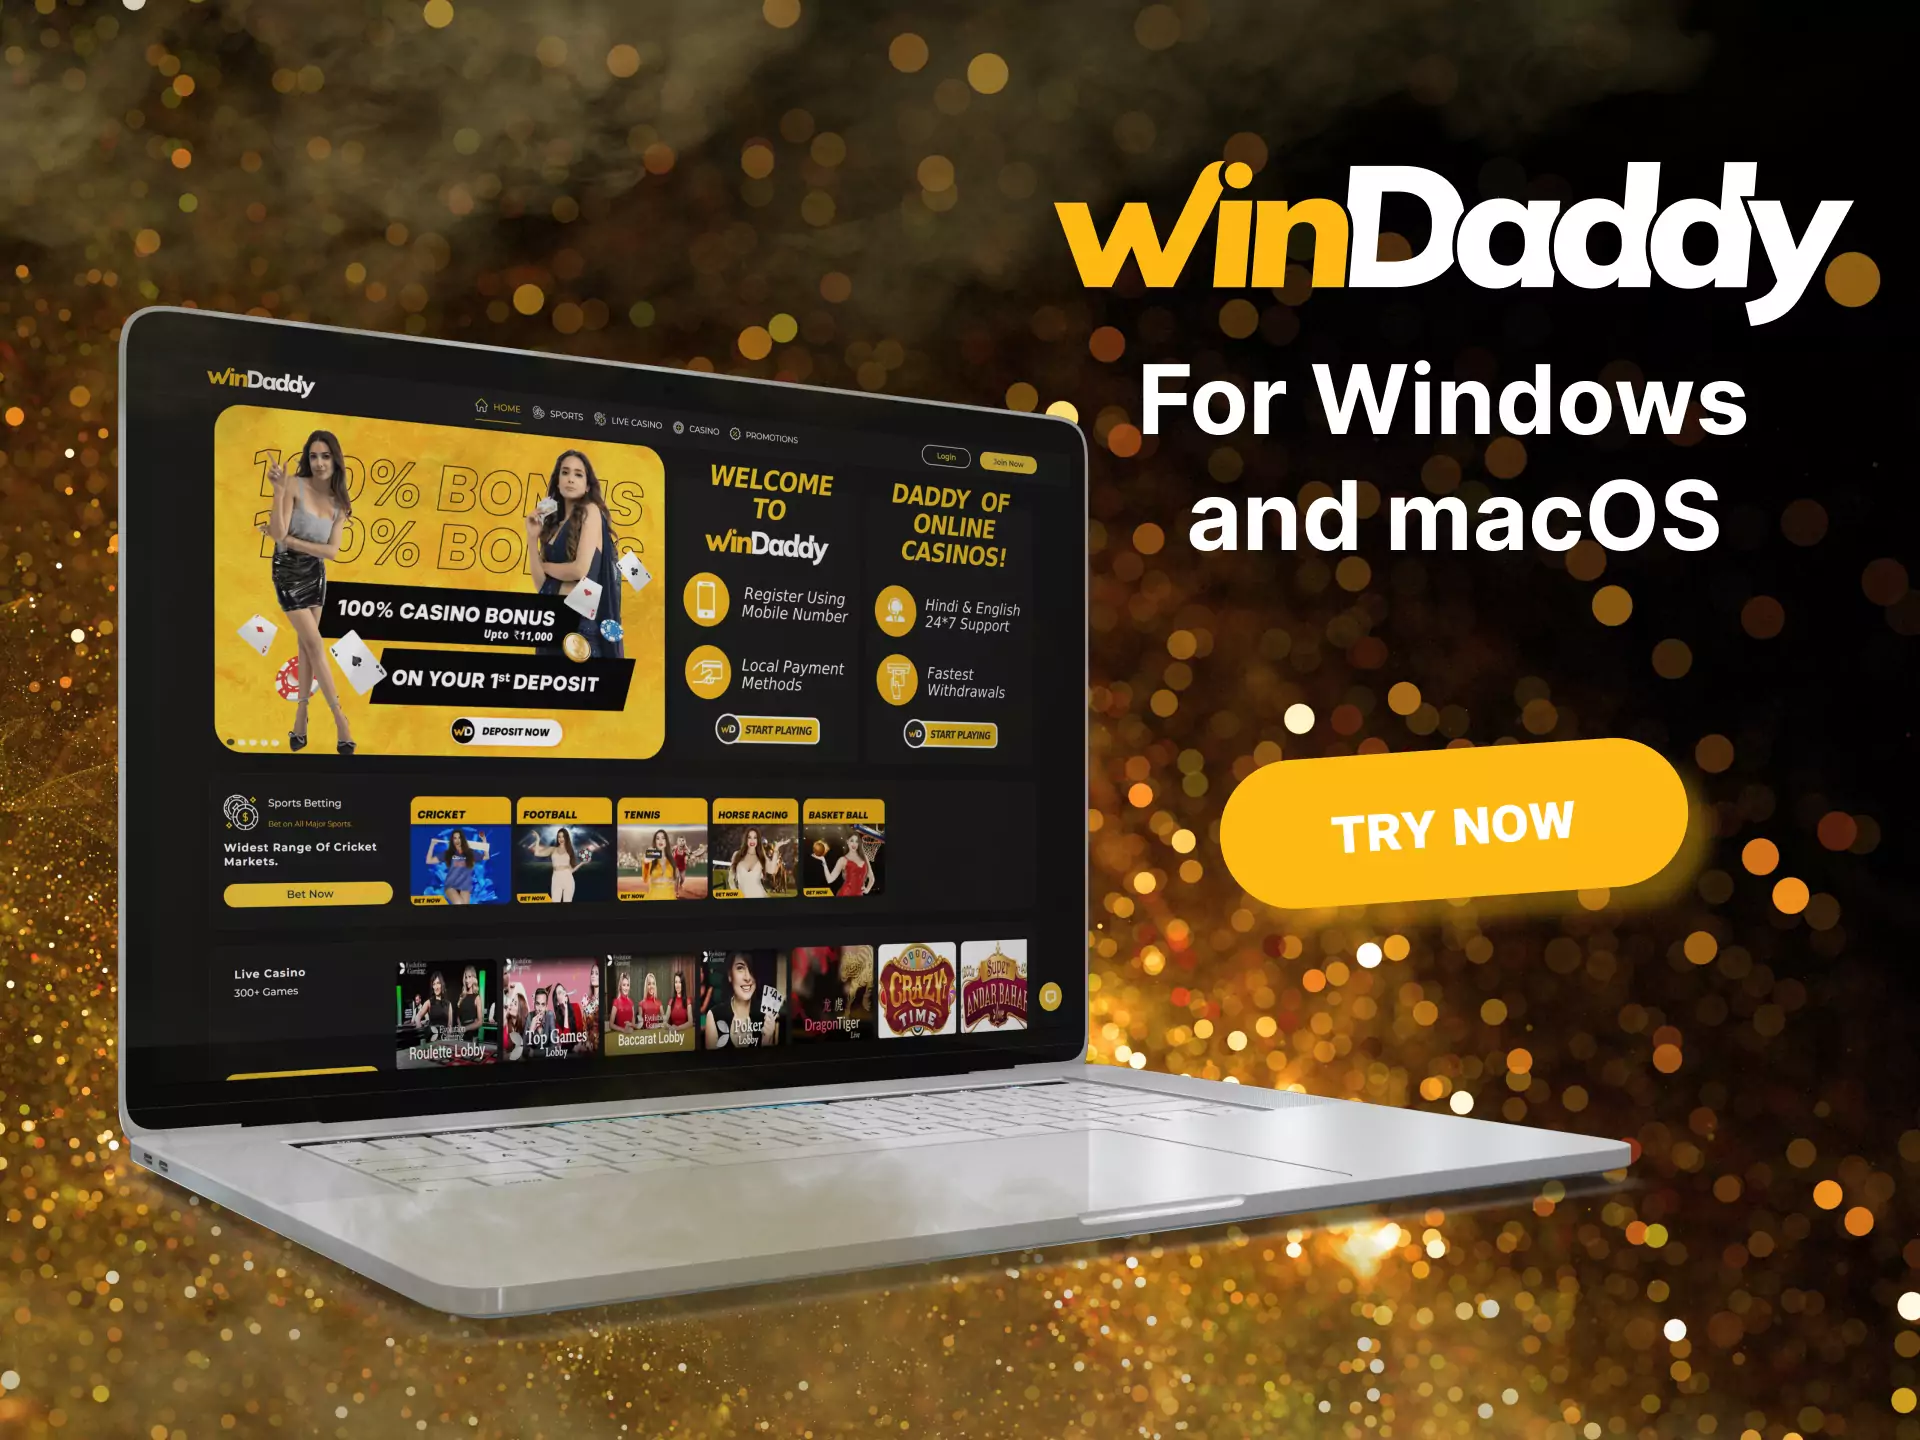 Use the Windaddy website through the browser of your Windows and macOS devices.